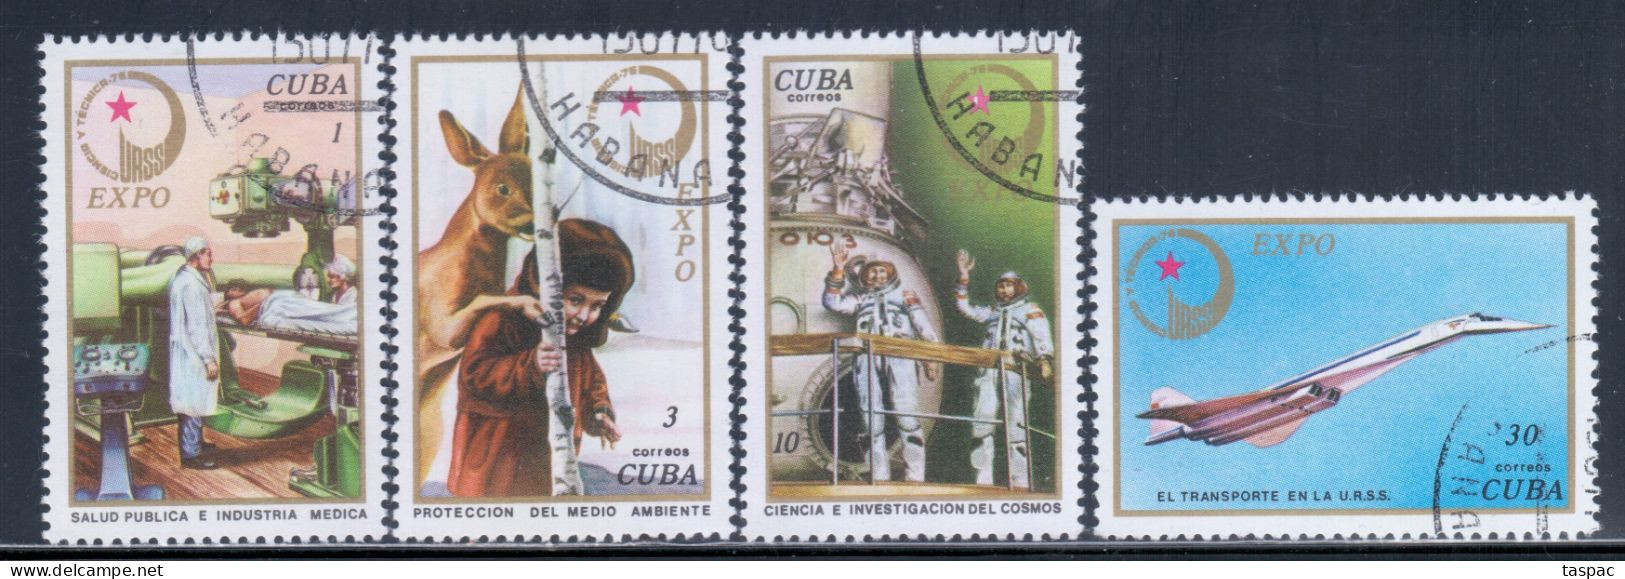 Cuba 1976 Mi# 2150-2153 Used - EXPO '76, USSR / Health, Fauna, Space, Supersonic Jet - Usados